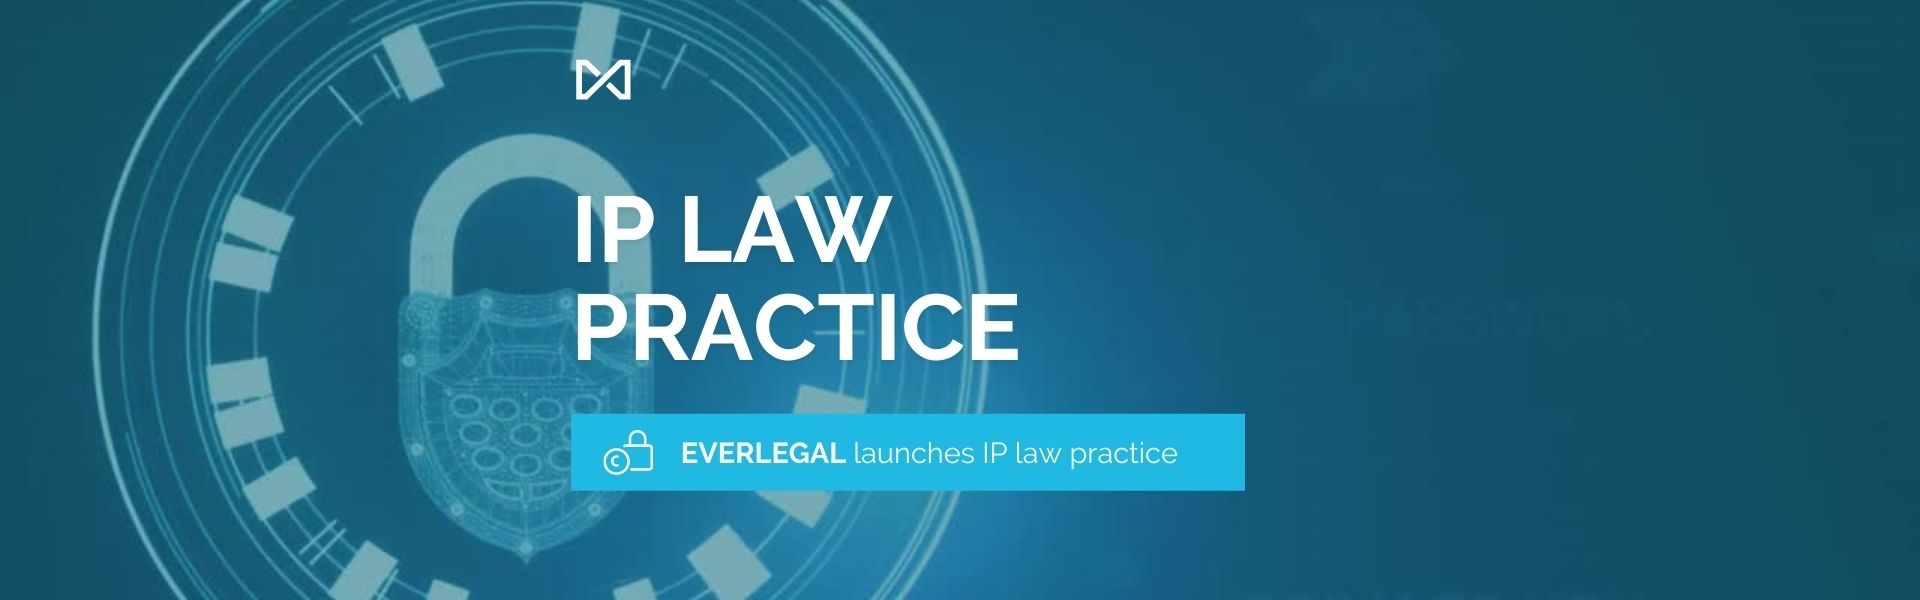 EVERLEGAL launches IP law practice